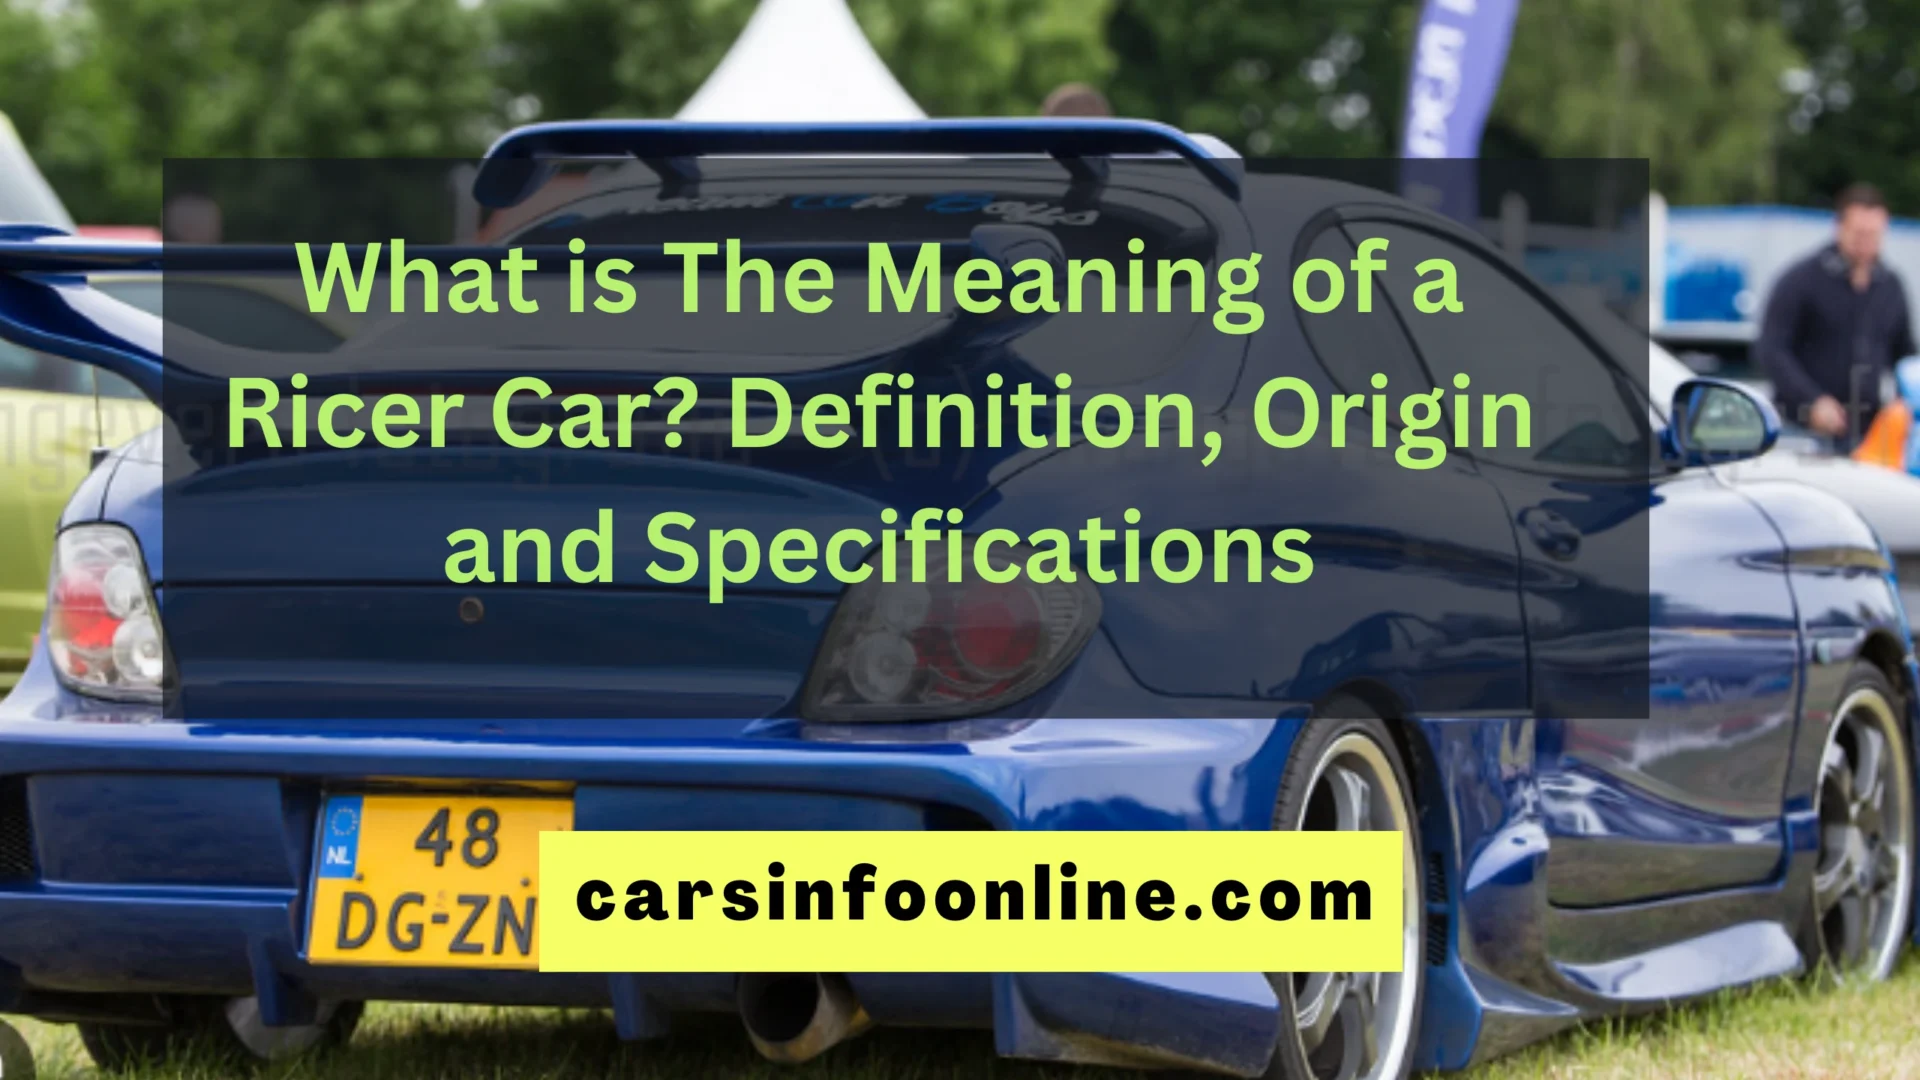 What is The Meaning of a Ricer Car Definition, Origin and Specifications